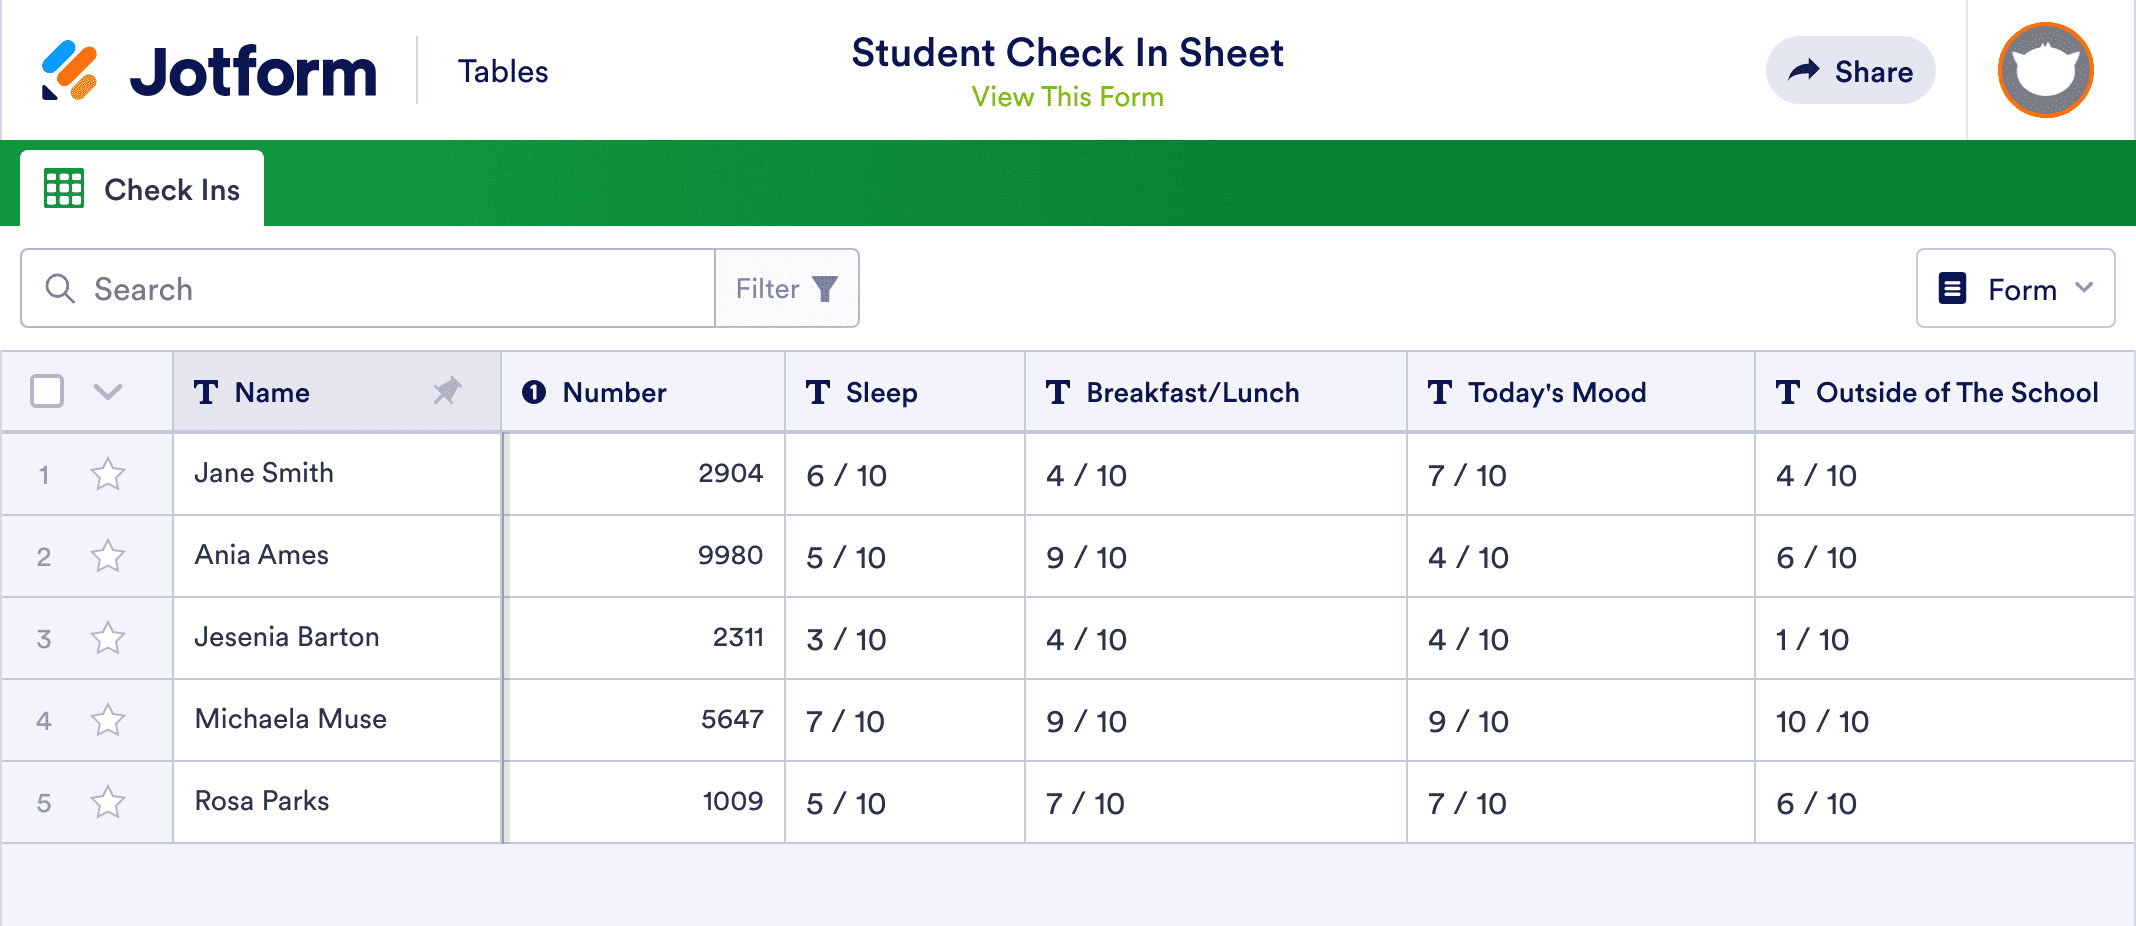 Student Check In Sheet